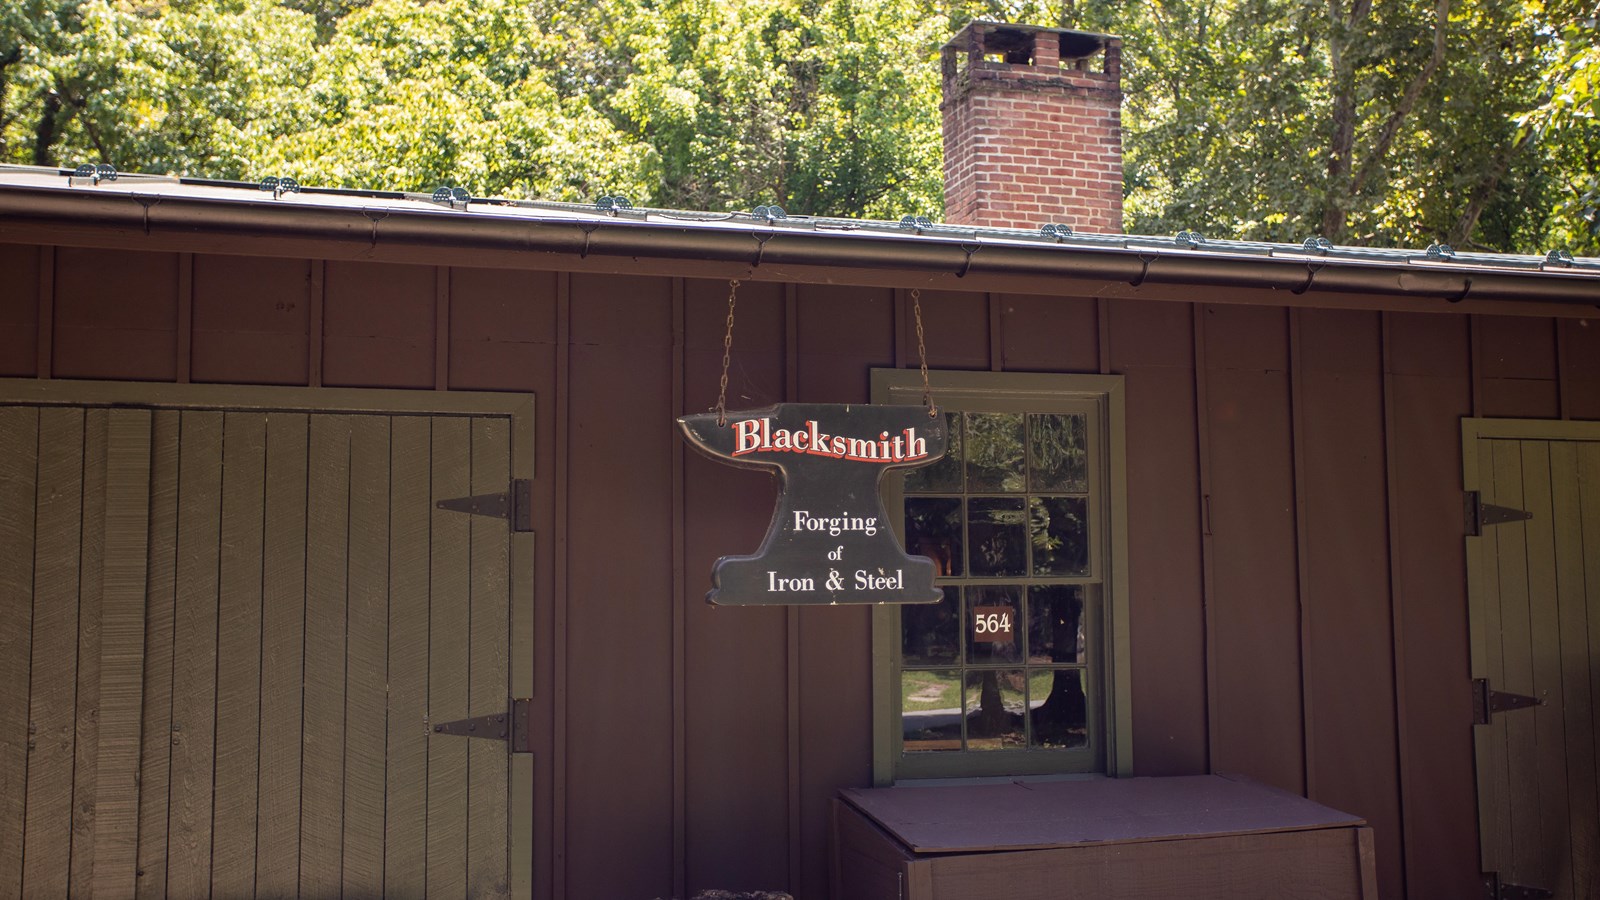 A dark brown building with an anvil-shaped sign 